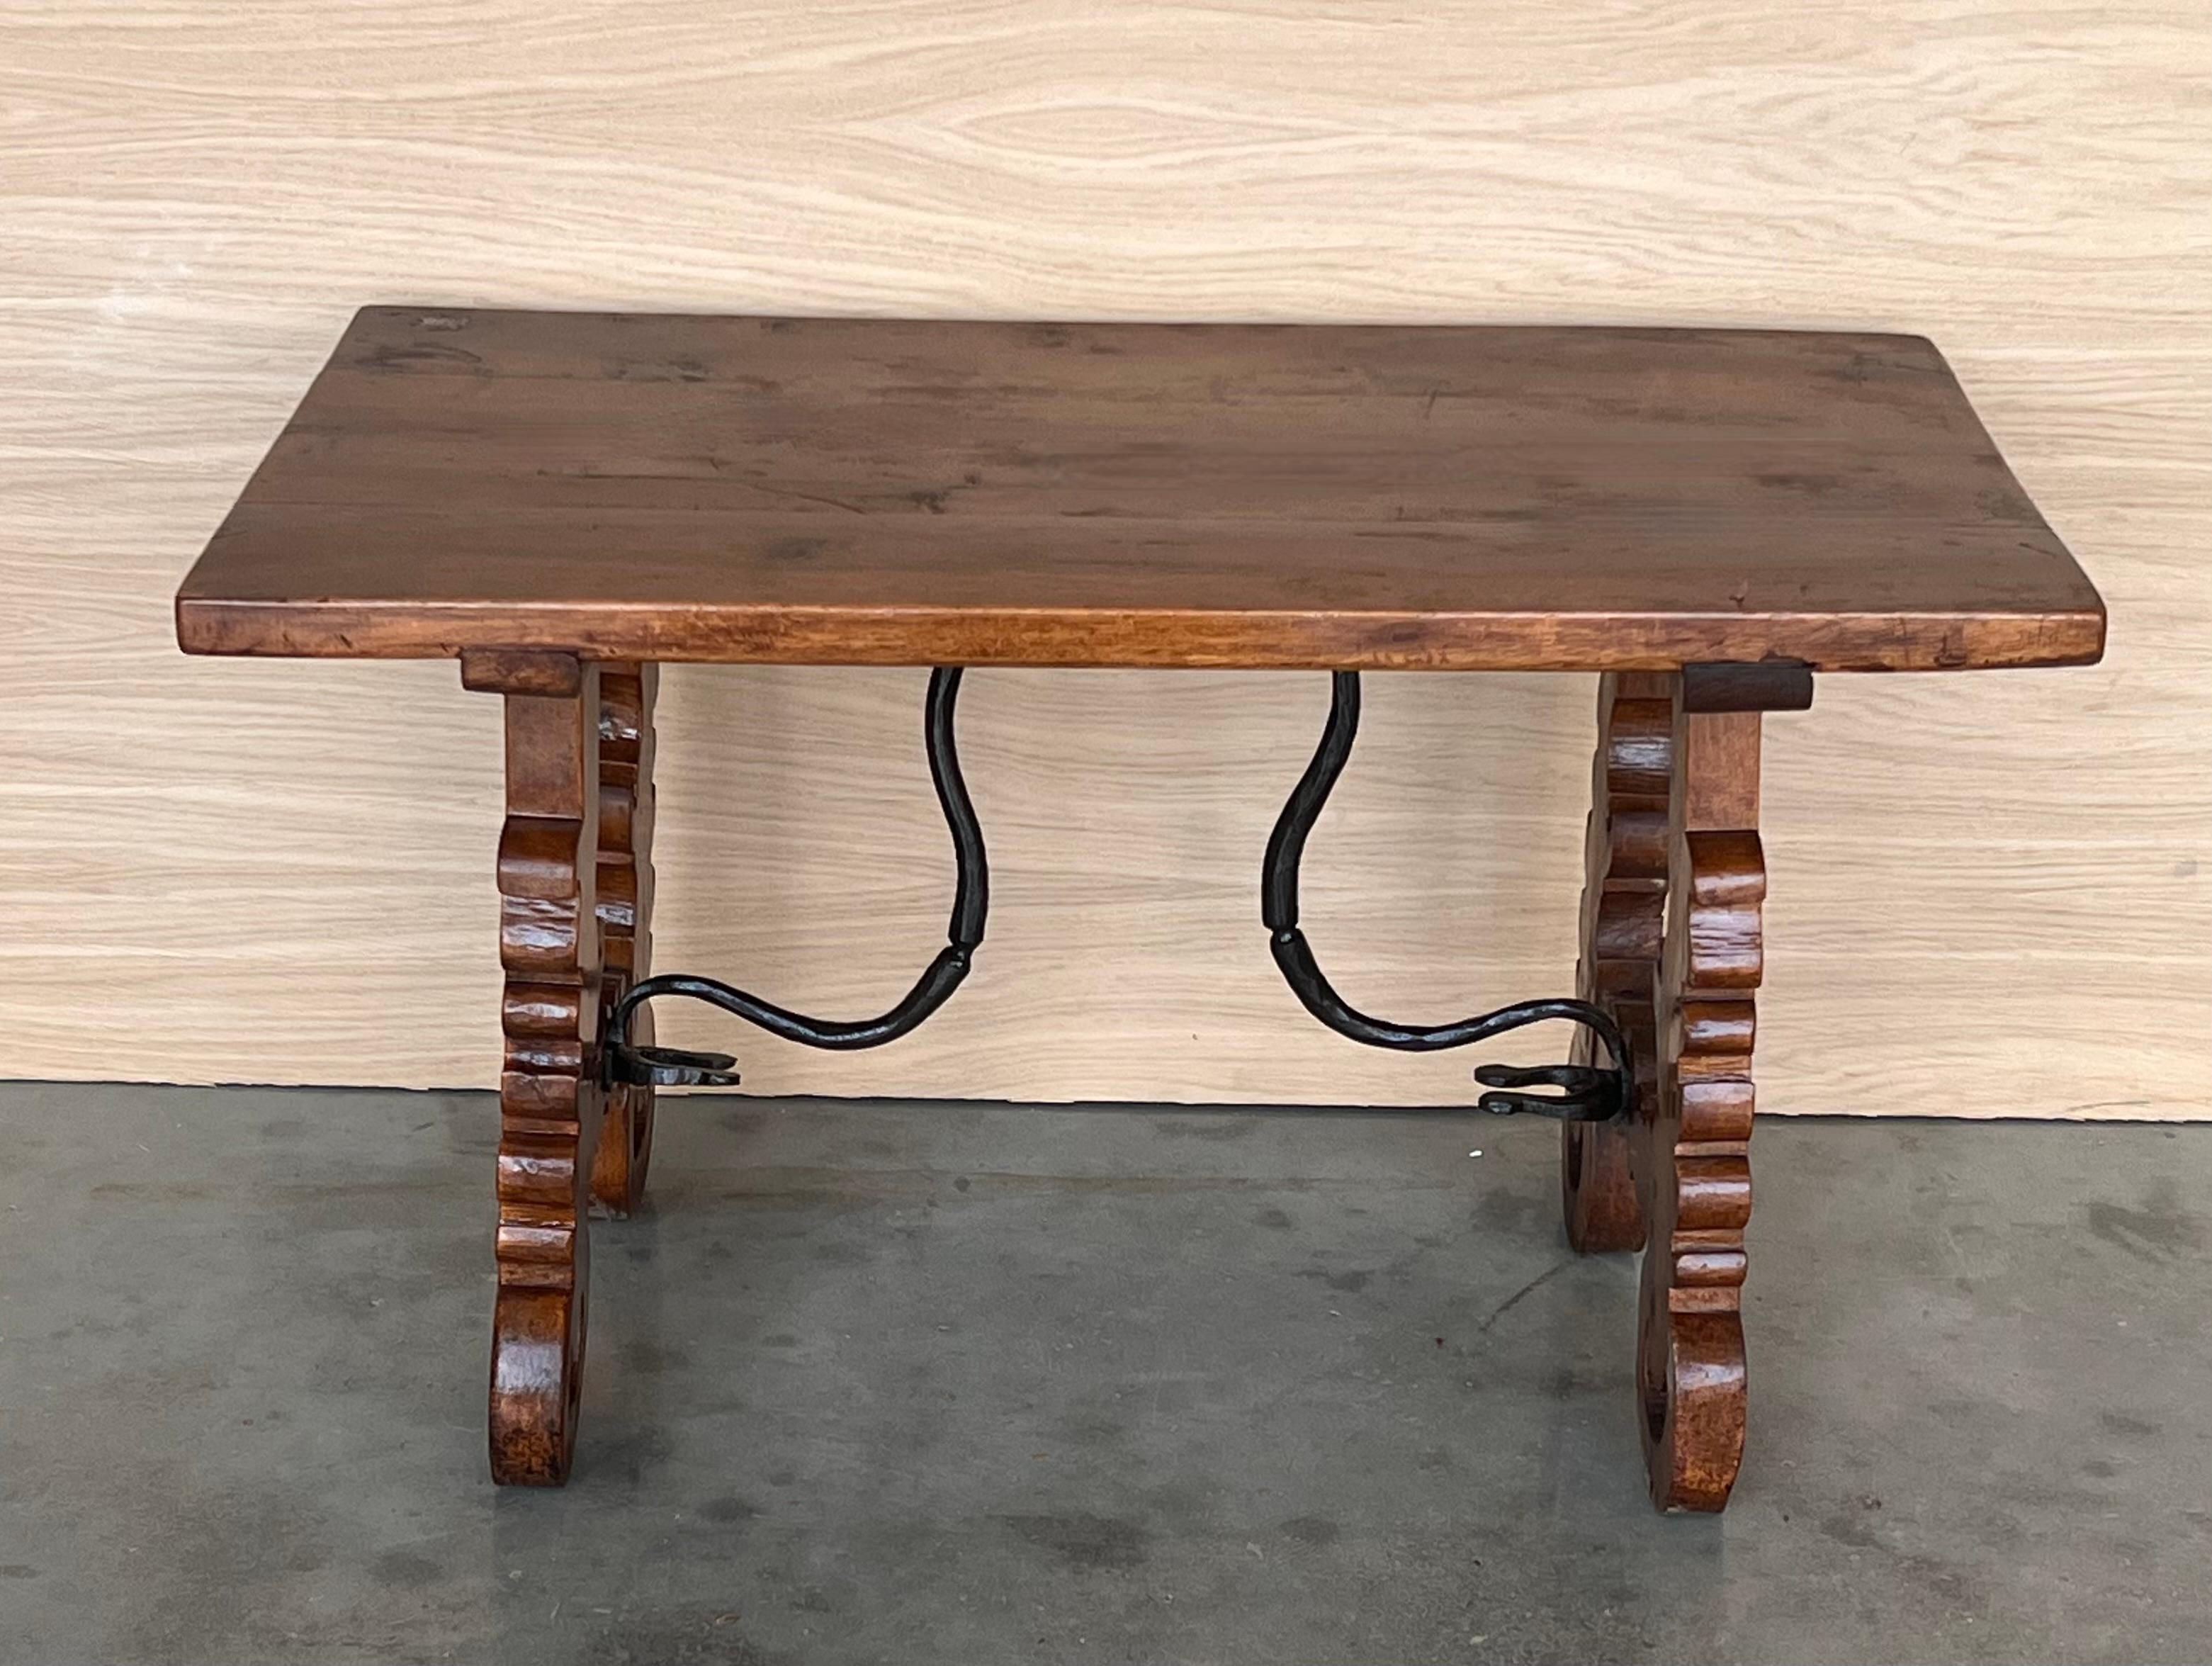 19th century Spanish trestle table in walnut. This piece has a great scale, lovely carved lyre legs and beautiful ebonized top. 
This table could be used as an end table, nightstand or side table .
Restored.